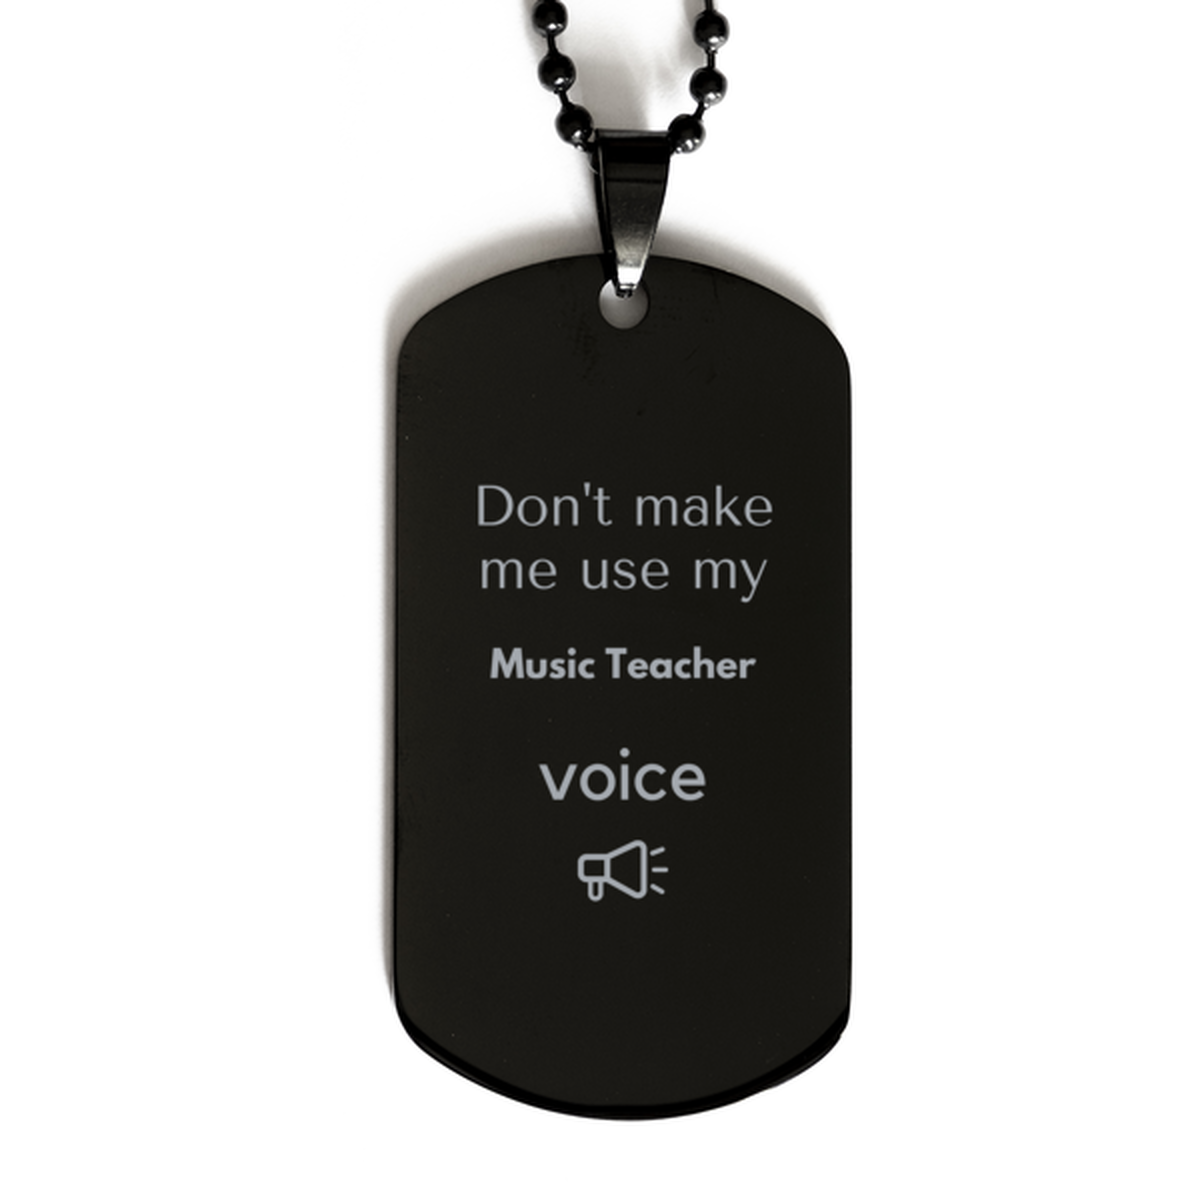 Don't make me use my Music Teacher voice, Sarcasm Music Teacher Gifts, Christmas Music Teacher Black Dog Tag Birthday Unique Gifts For Music Teacher Coworkers, Men, Women, Colleague, Friends